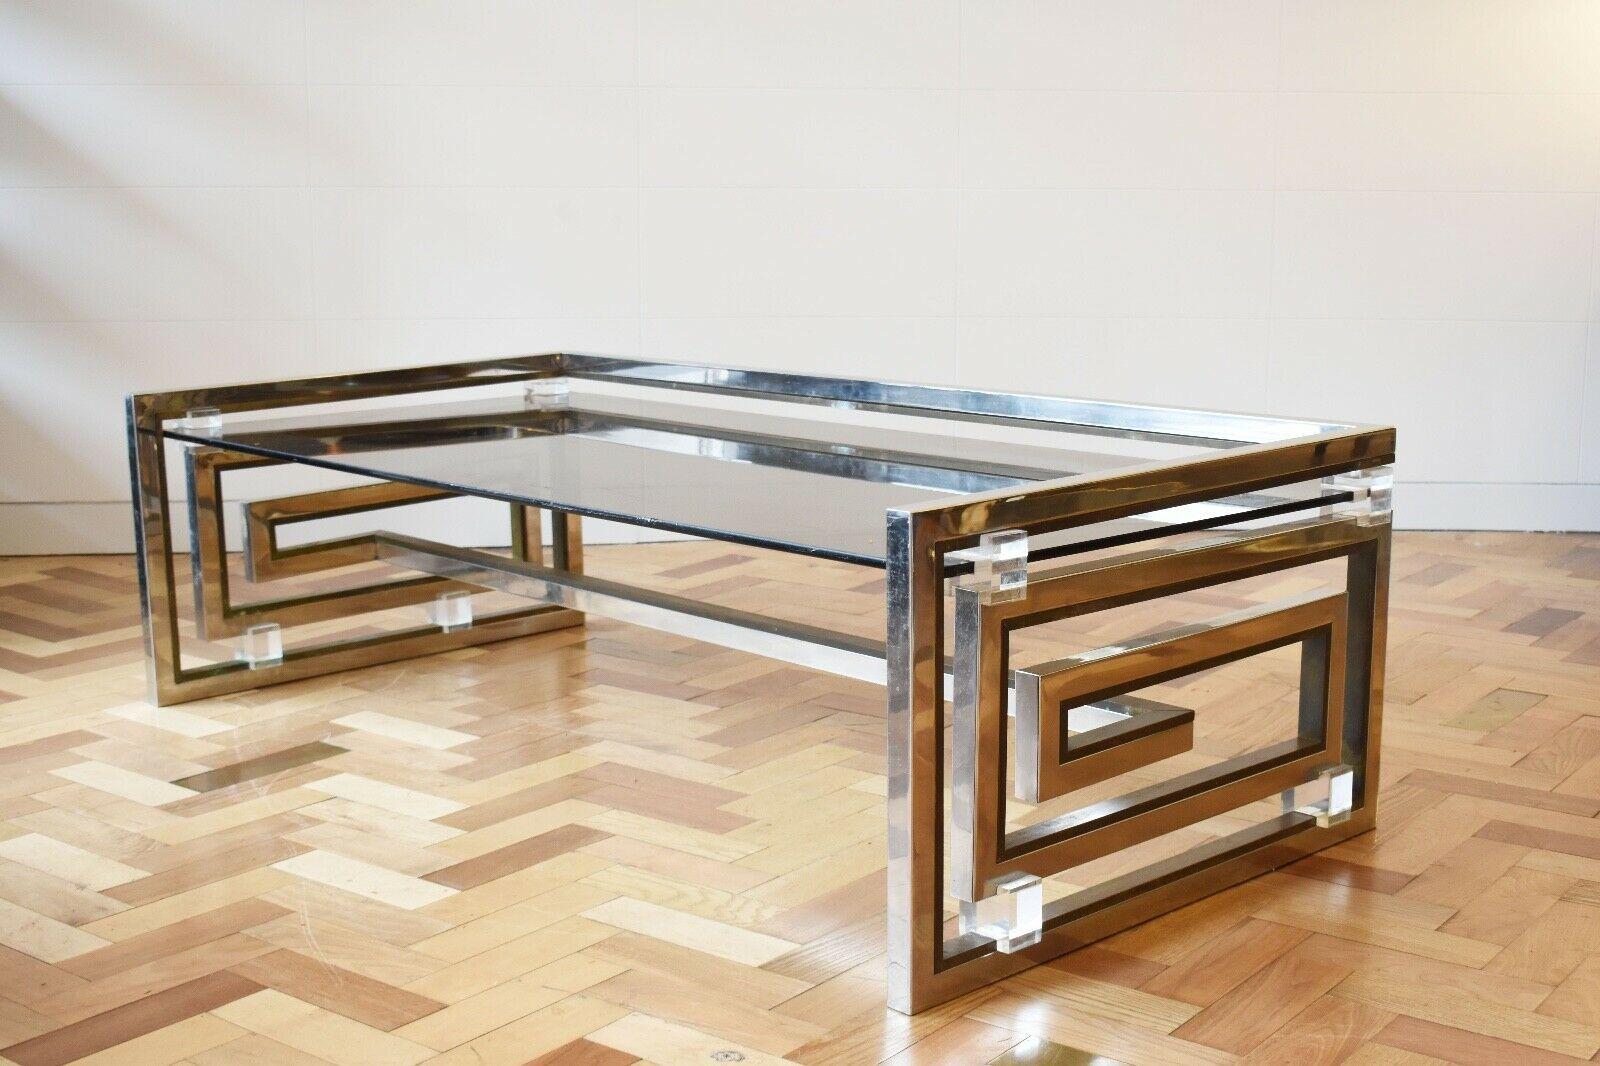 Spectacular coffee table designed by Romeo Rega, Italy, 1970's.

This beautiful coffee table is made from a chrome and brass frame which has been designed as a modernist greek key form, accented with lucite blocks which hold the coffee tables